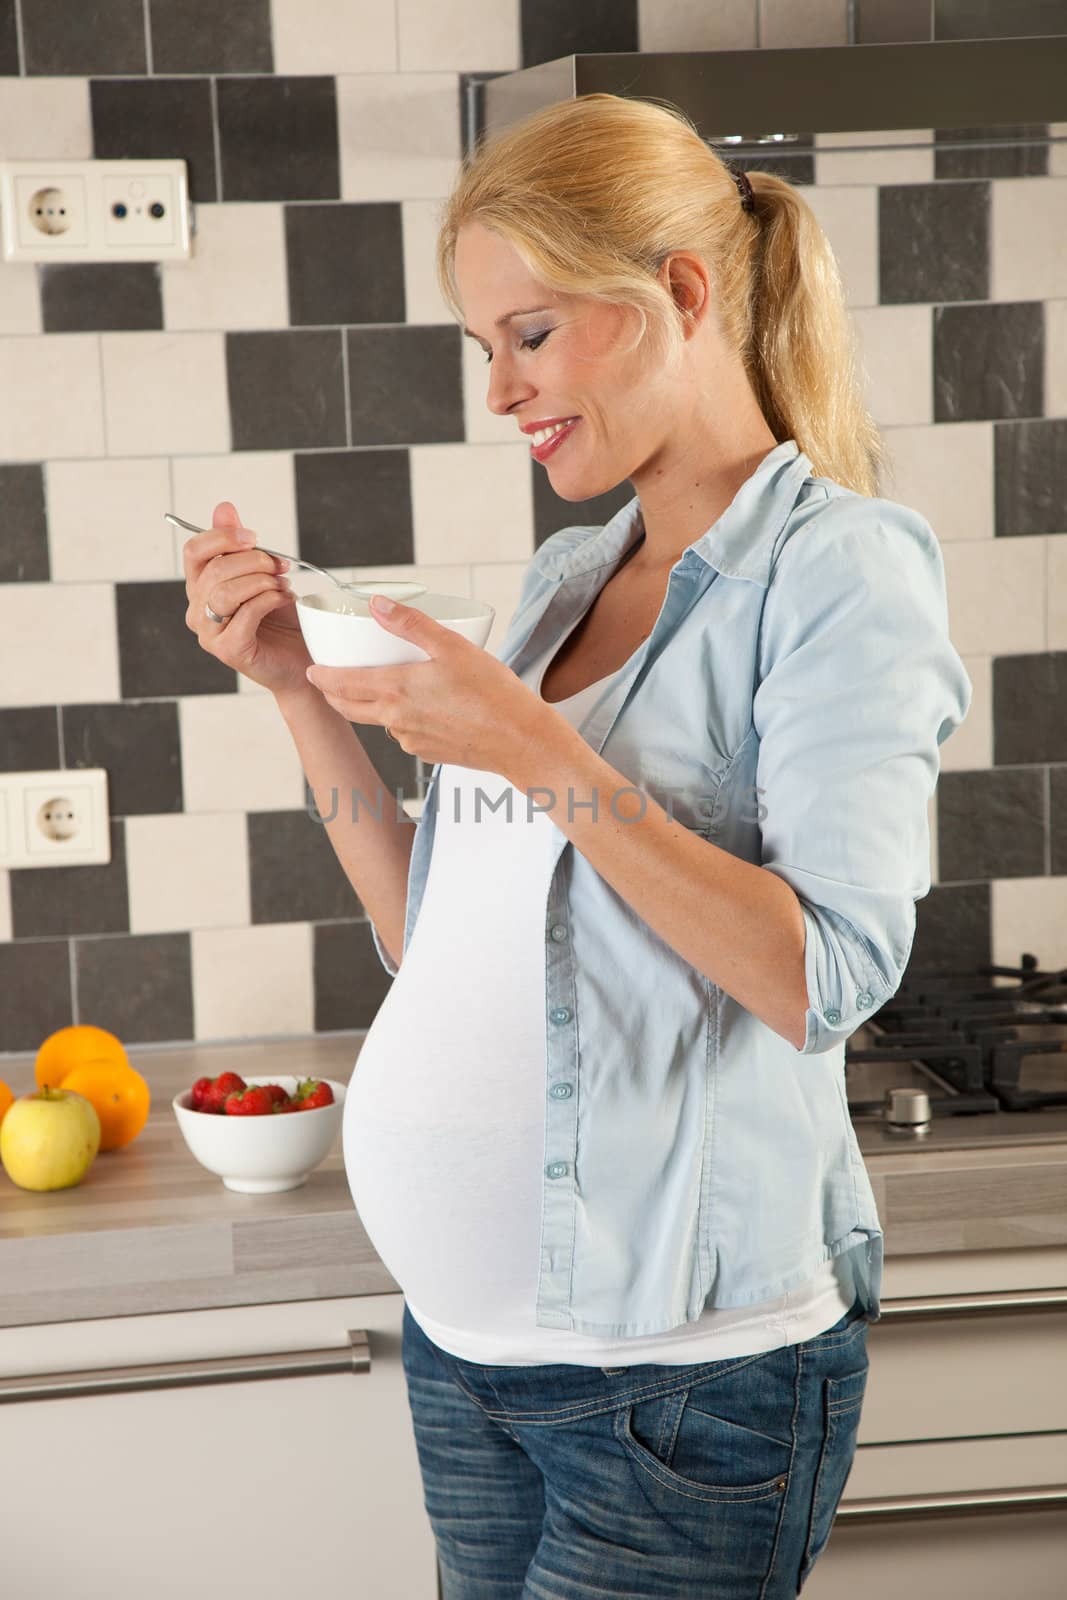 Healthy eating while pregnant by Fotosmurf